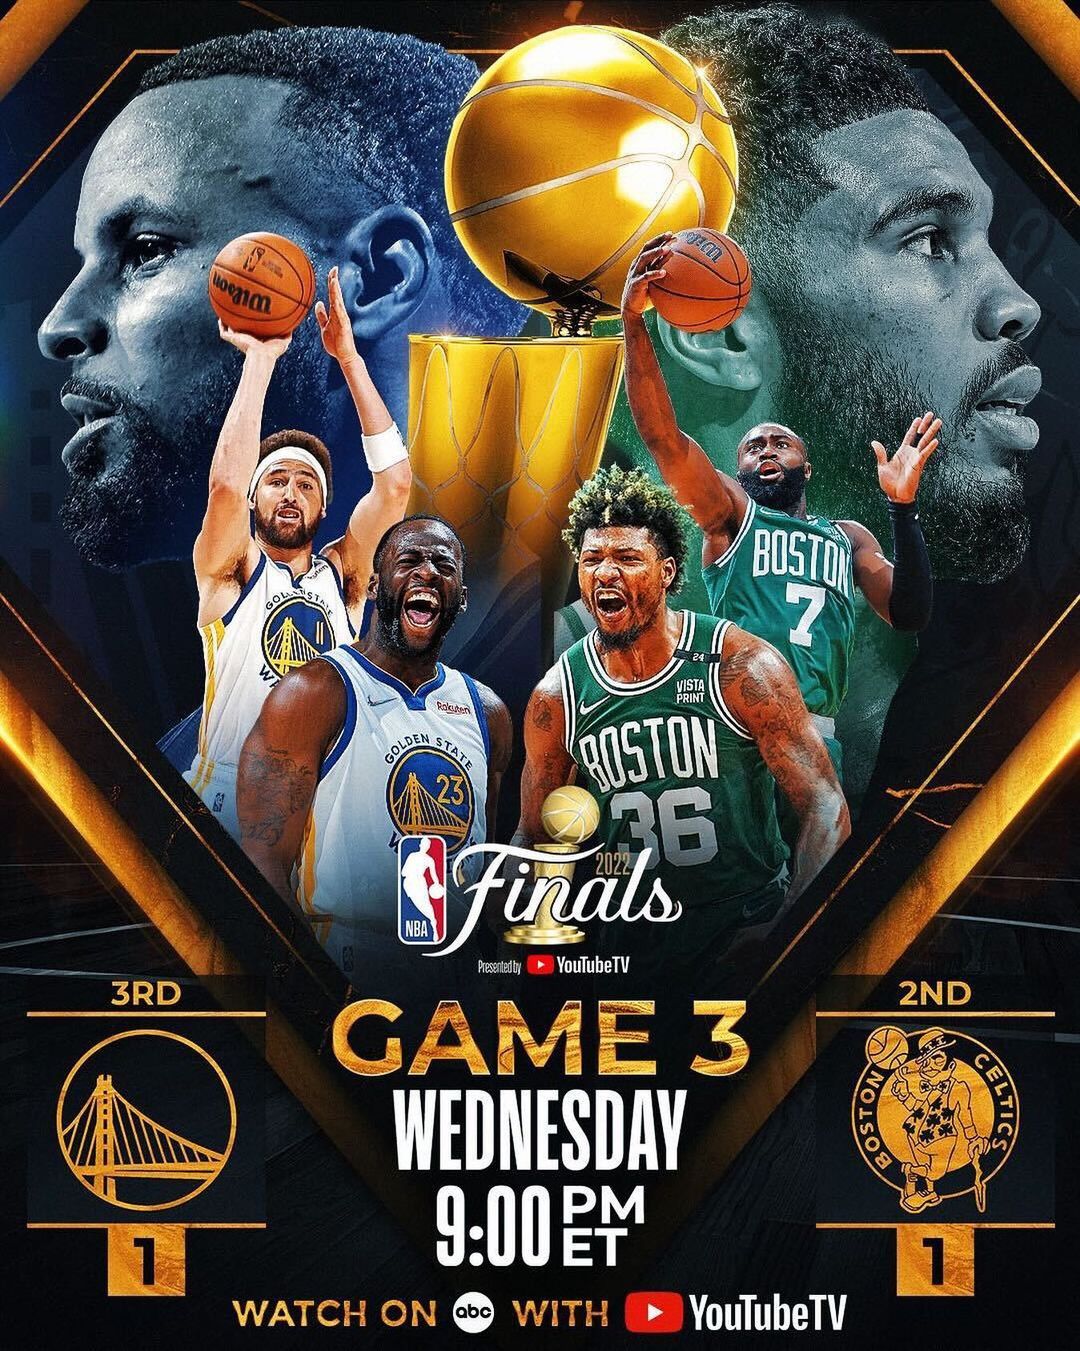 The series now shifts to Boston for Game 3 on Wednesday!  #NBAFinals presented ...